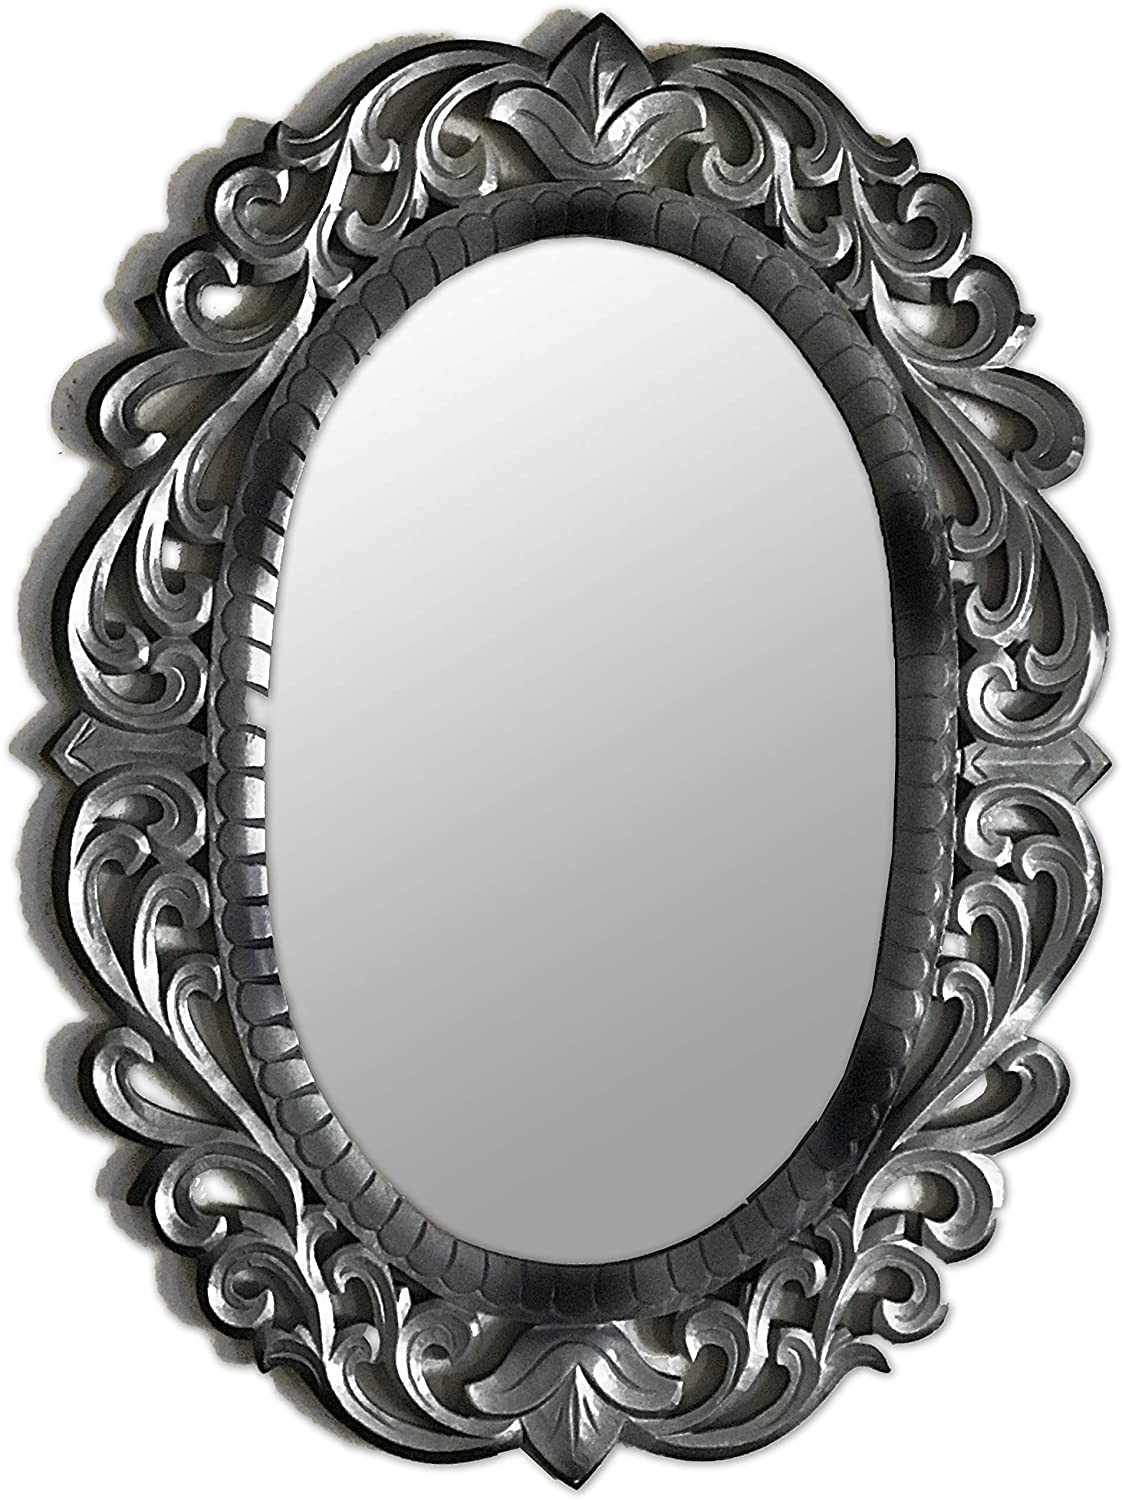 Oval Decorative Wood Wall Mirror, Carved Wooden Frame Mirror